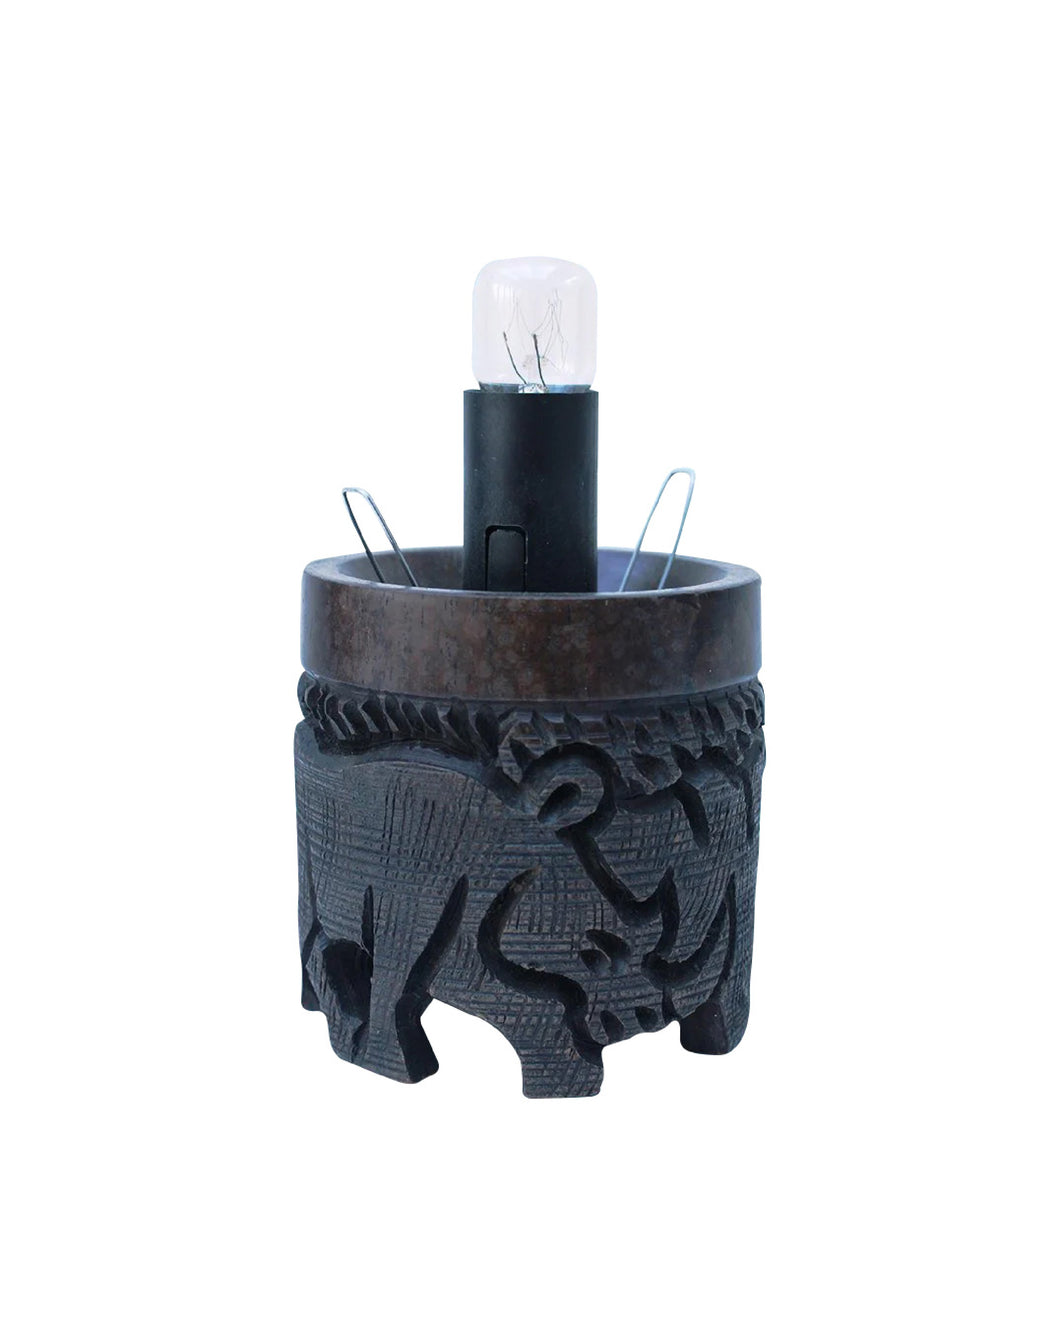 Carved wooden elephant lamp